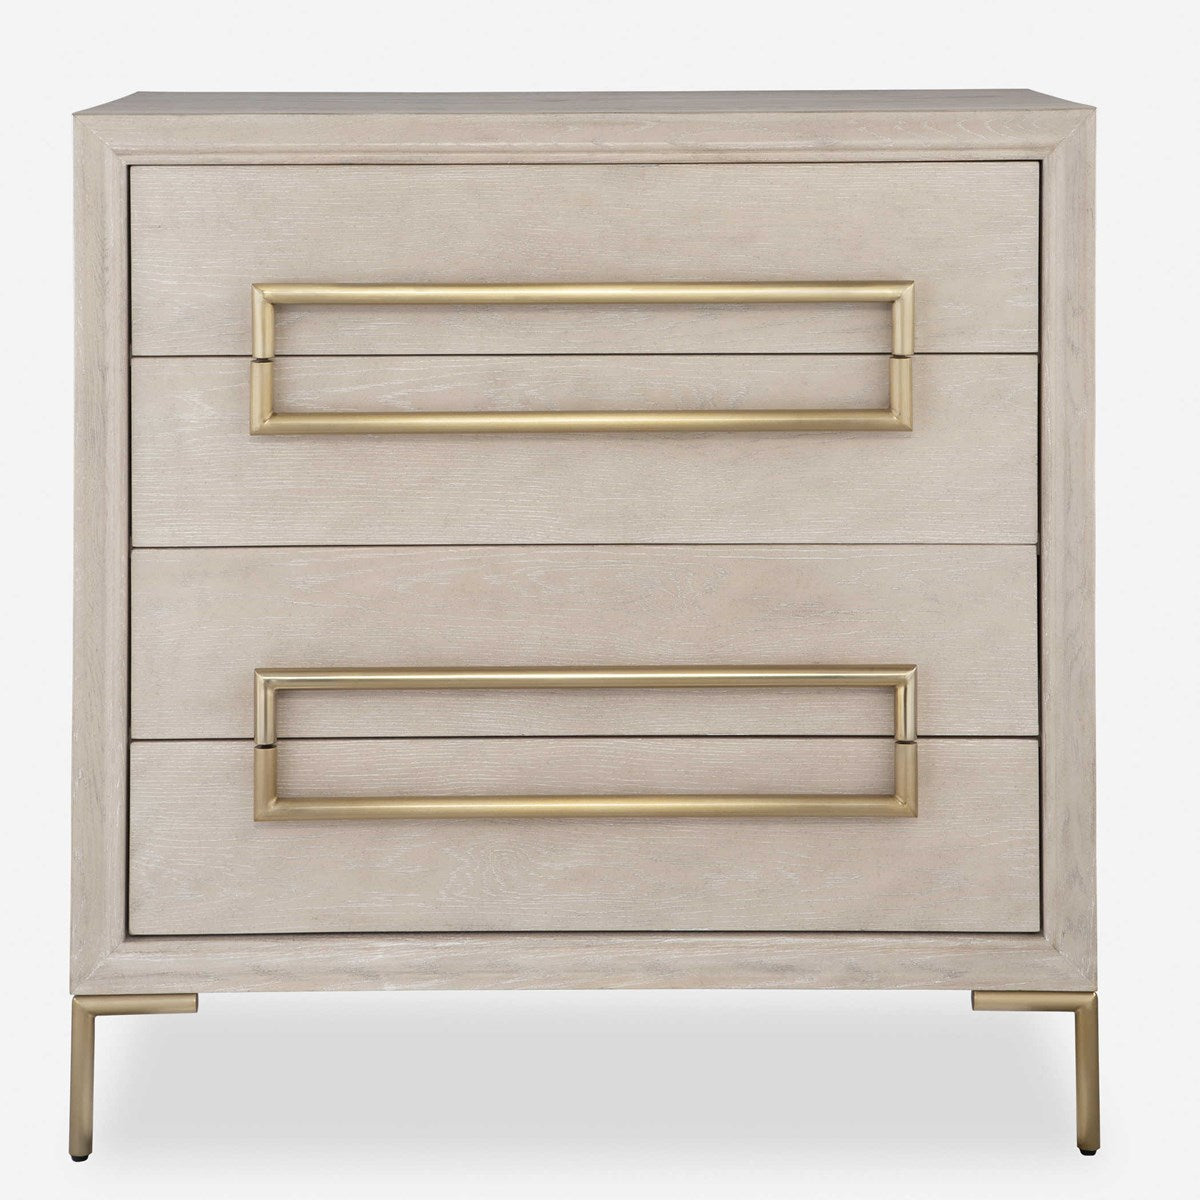 Uttermost - 24770 - Accent Chest - Alessia - Brushed Brass